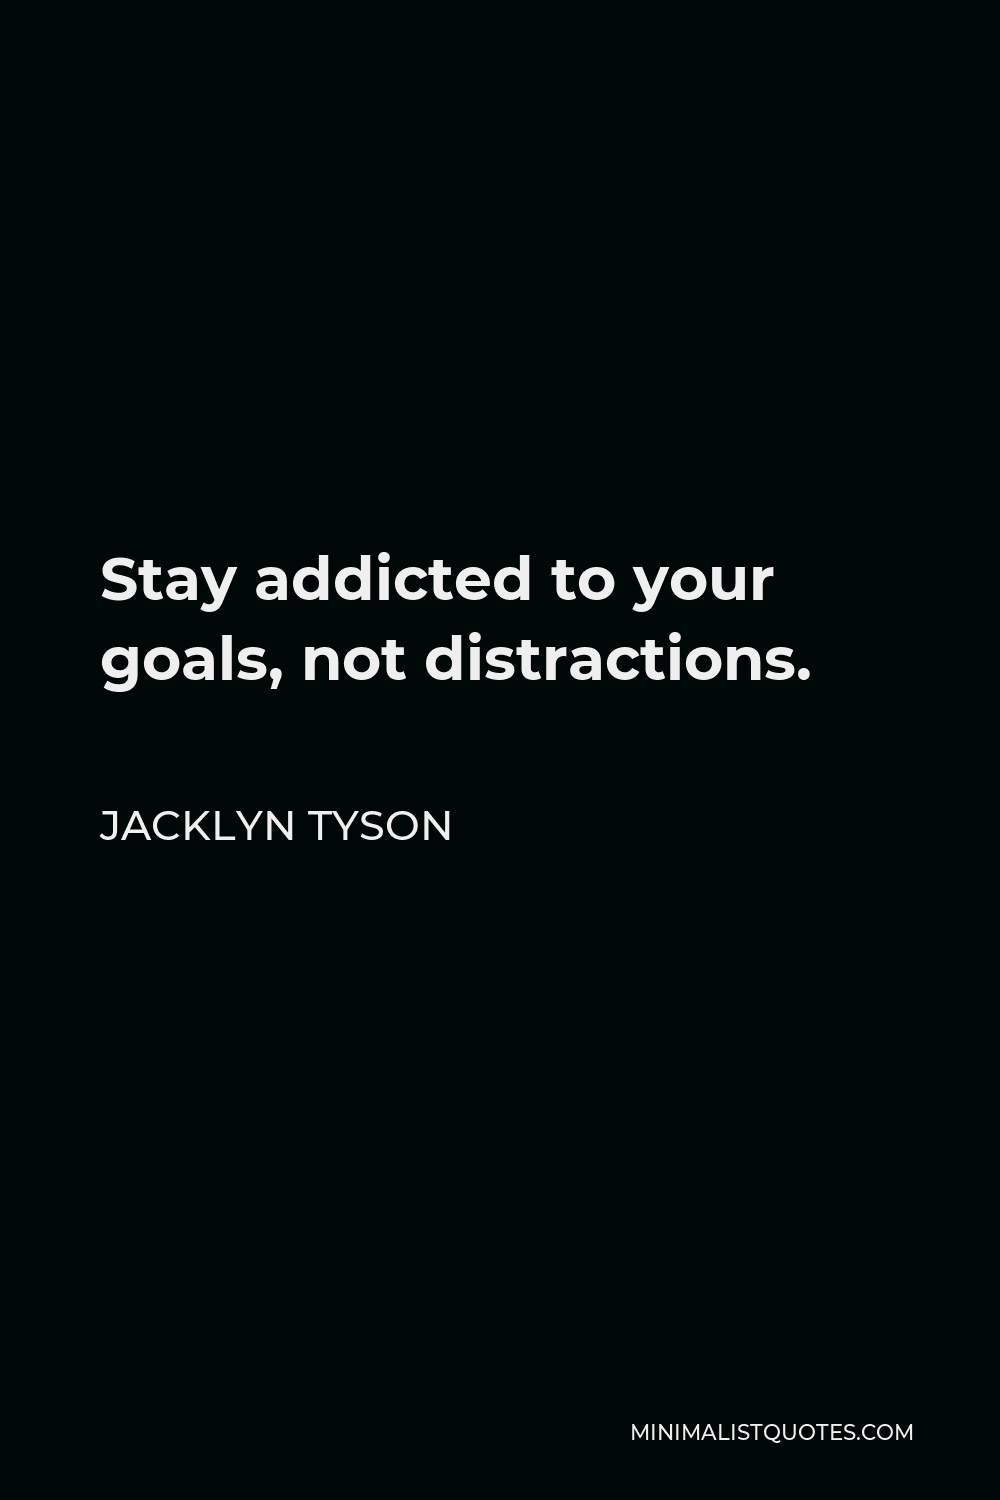 Jacklyn Tyson Quote - Stay addicted to your goals, not distractions.